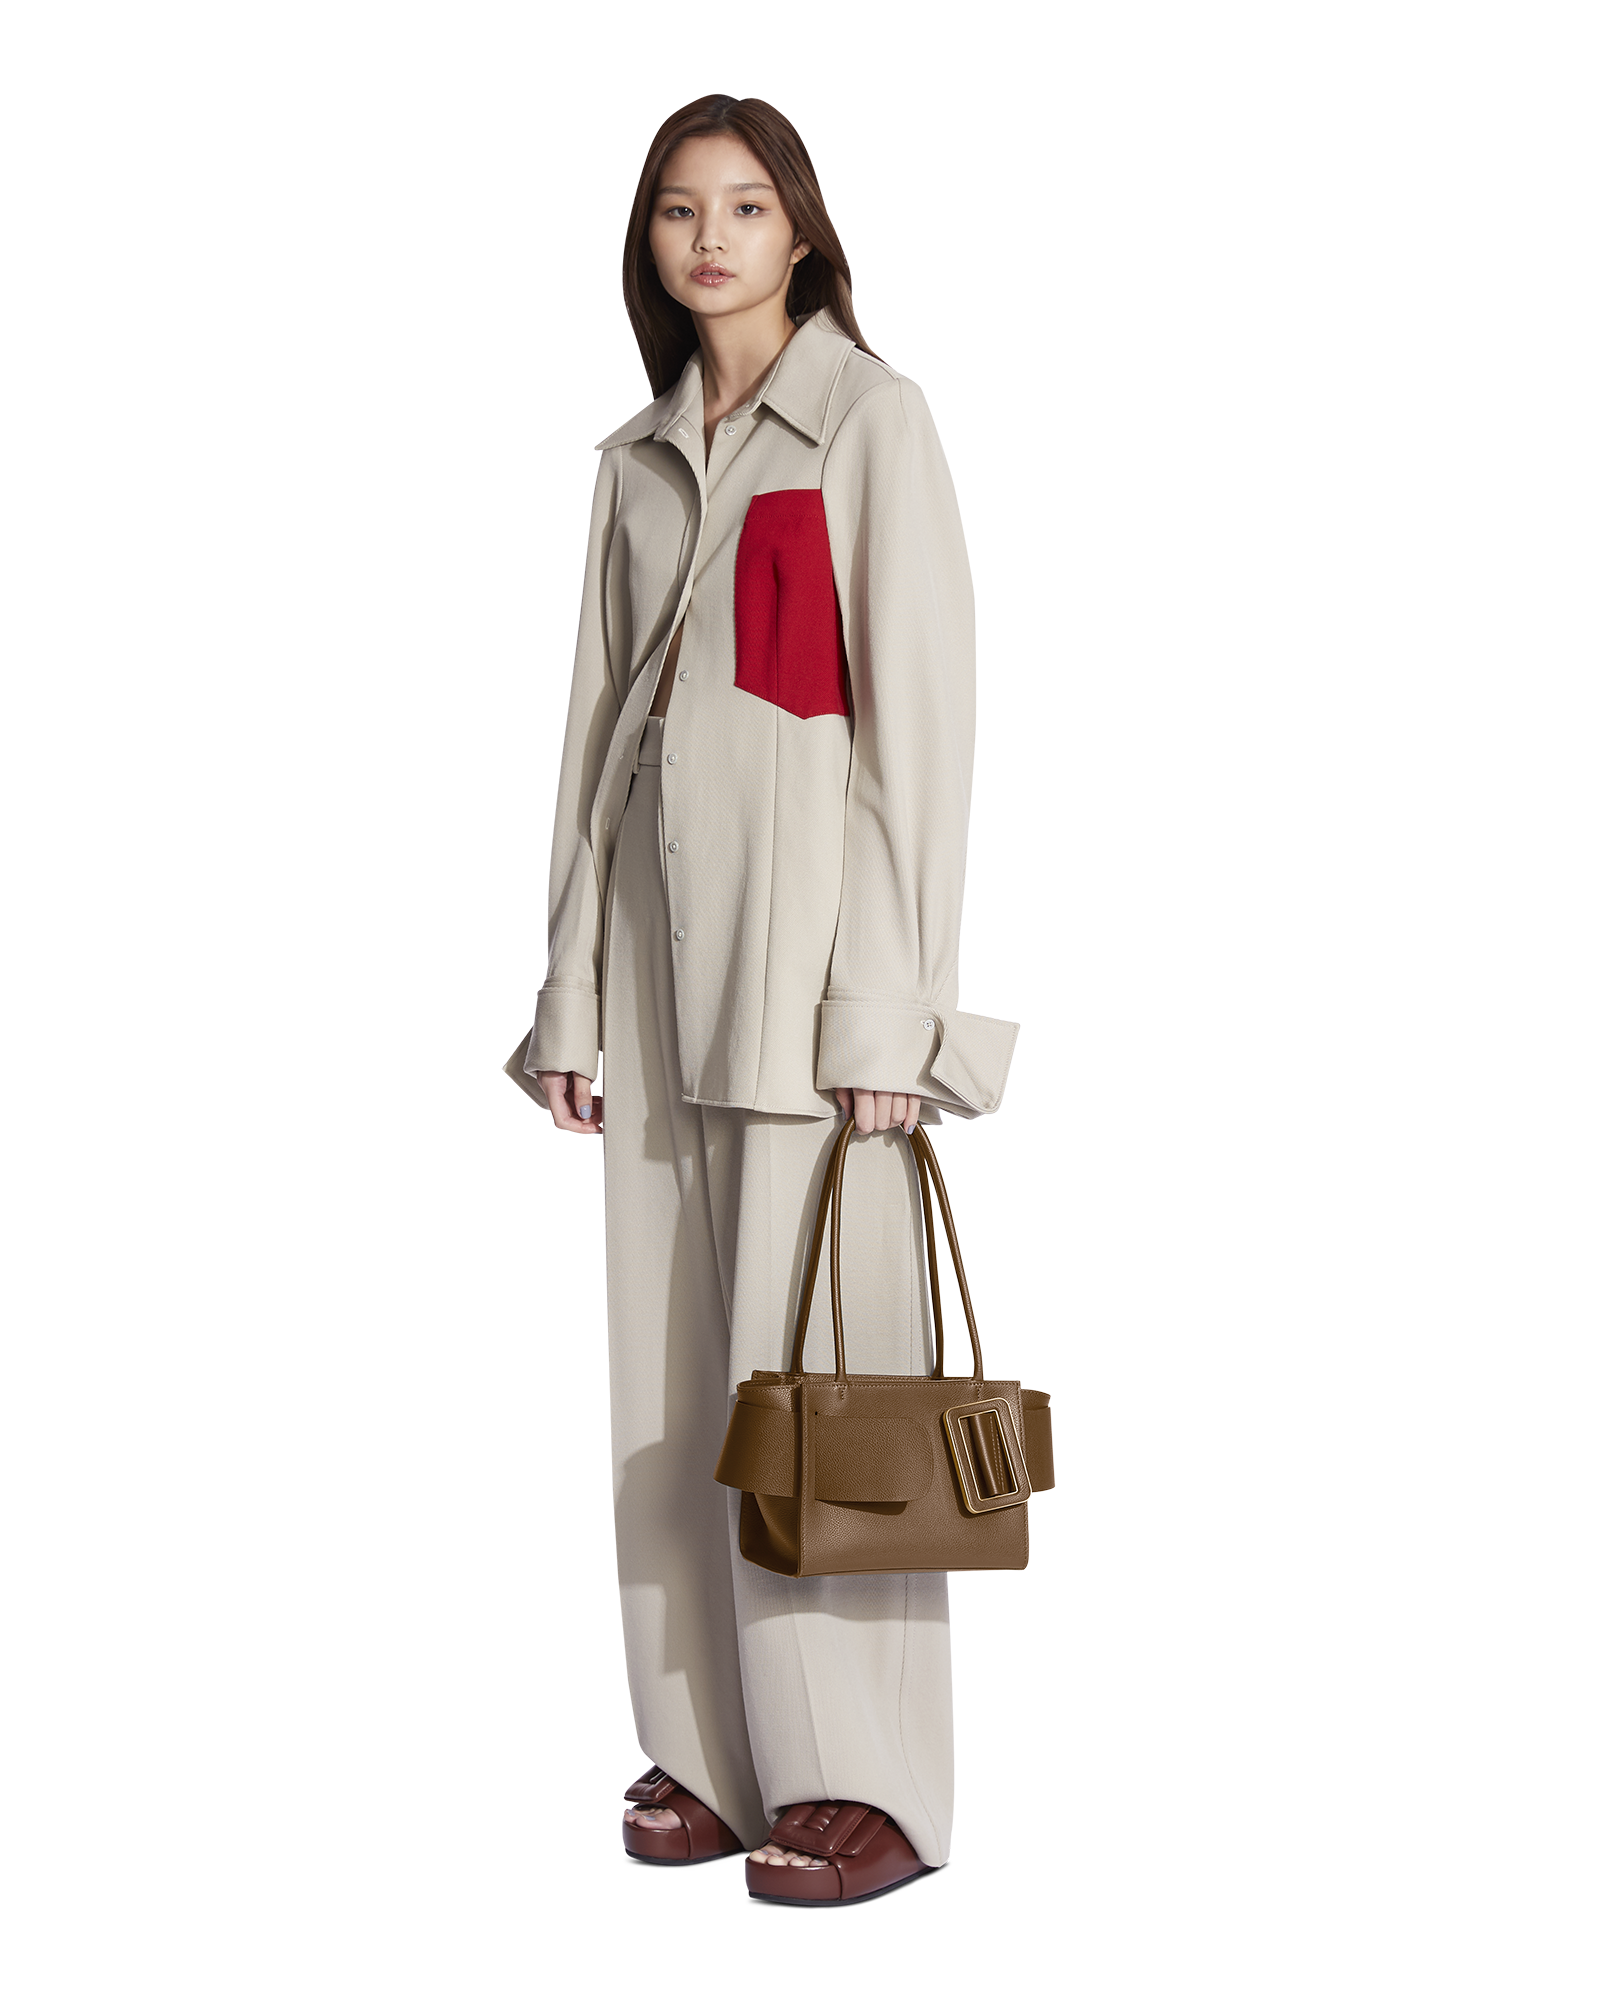 SS21 SOFT COLLECTION BOBBY 23 SOFT With zipper closure and elongated  handles for shoulder , arm and hand natural grain calf leather, By BOYY